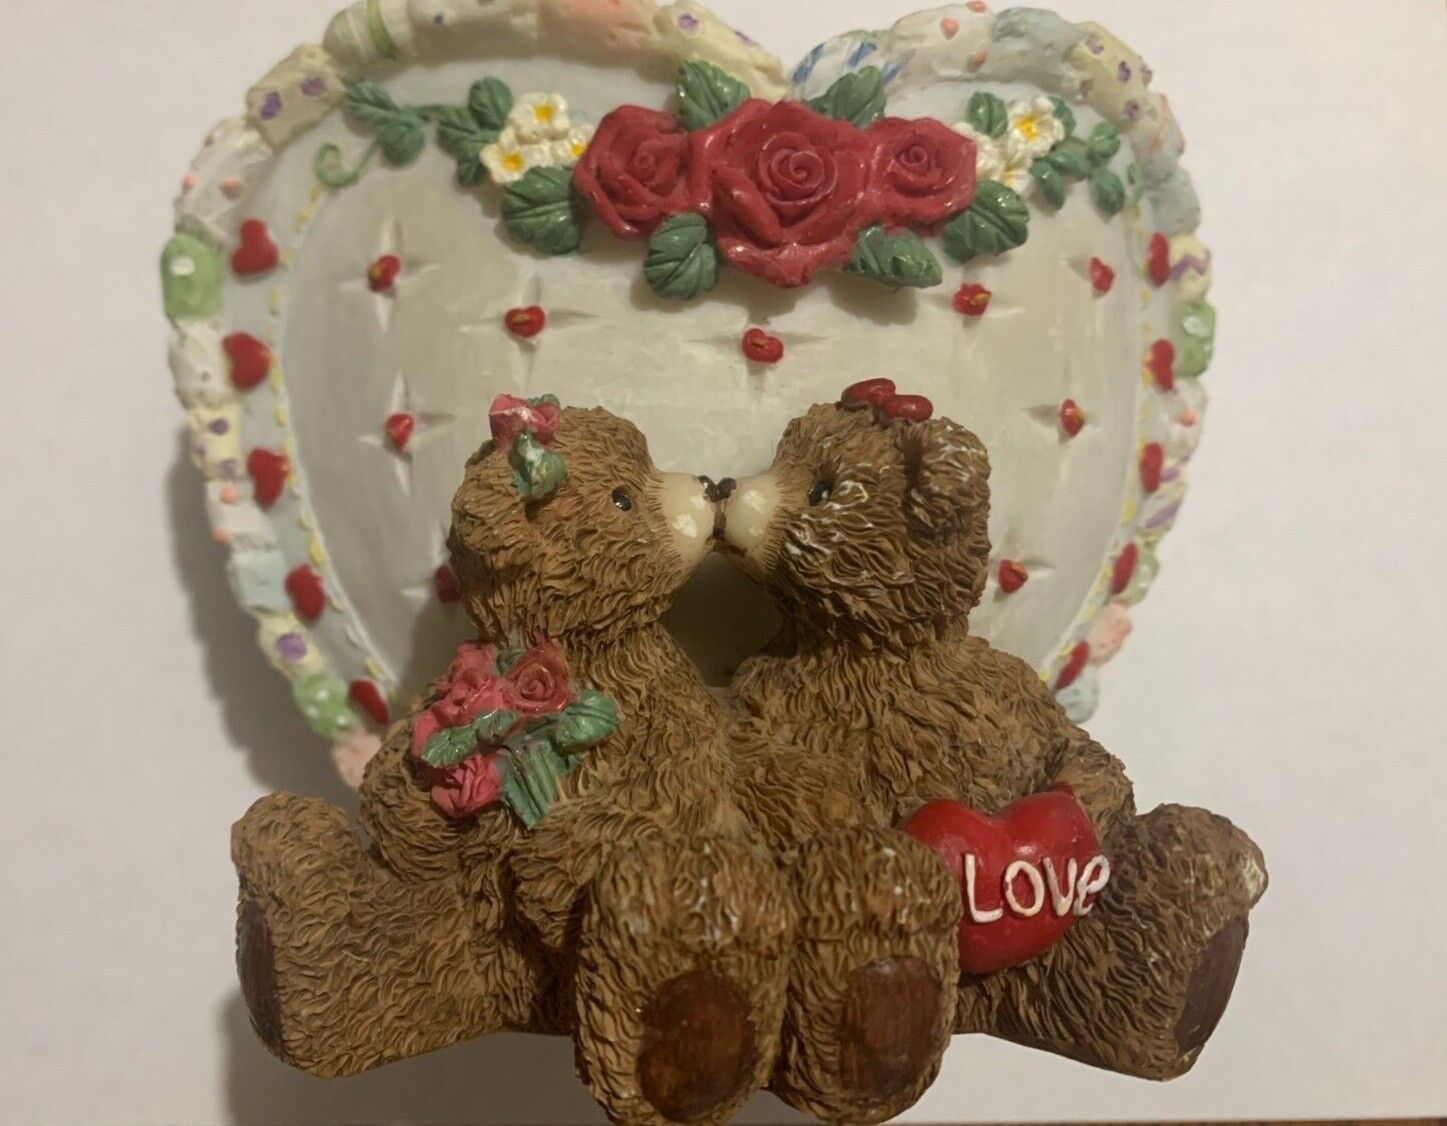 Vase  Heart  Shaped  With  Two Teddy  Bears  1998 Joelson 